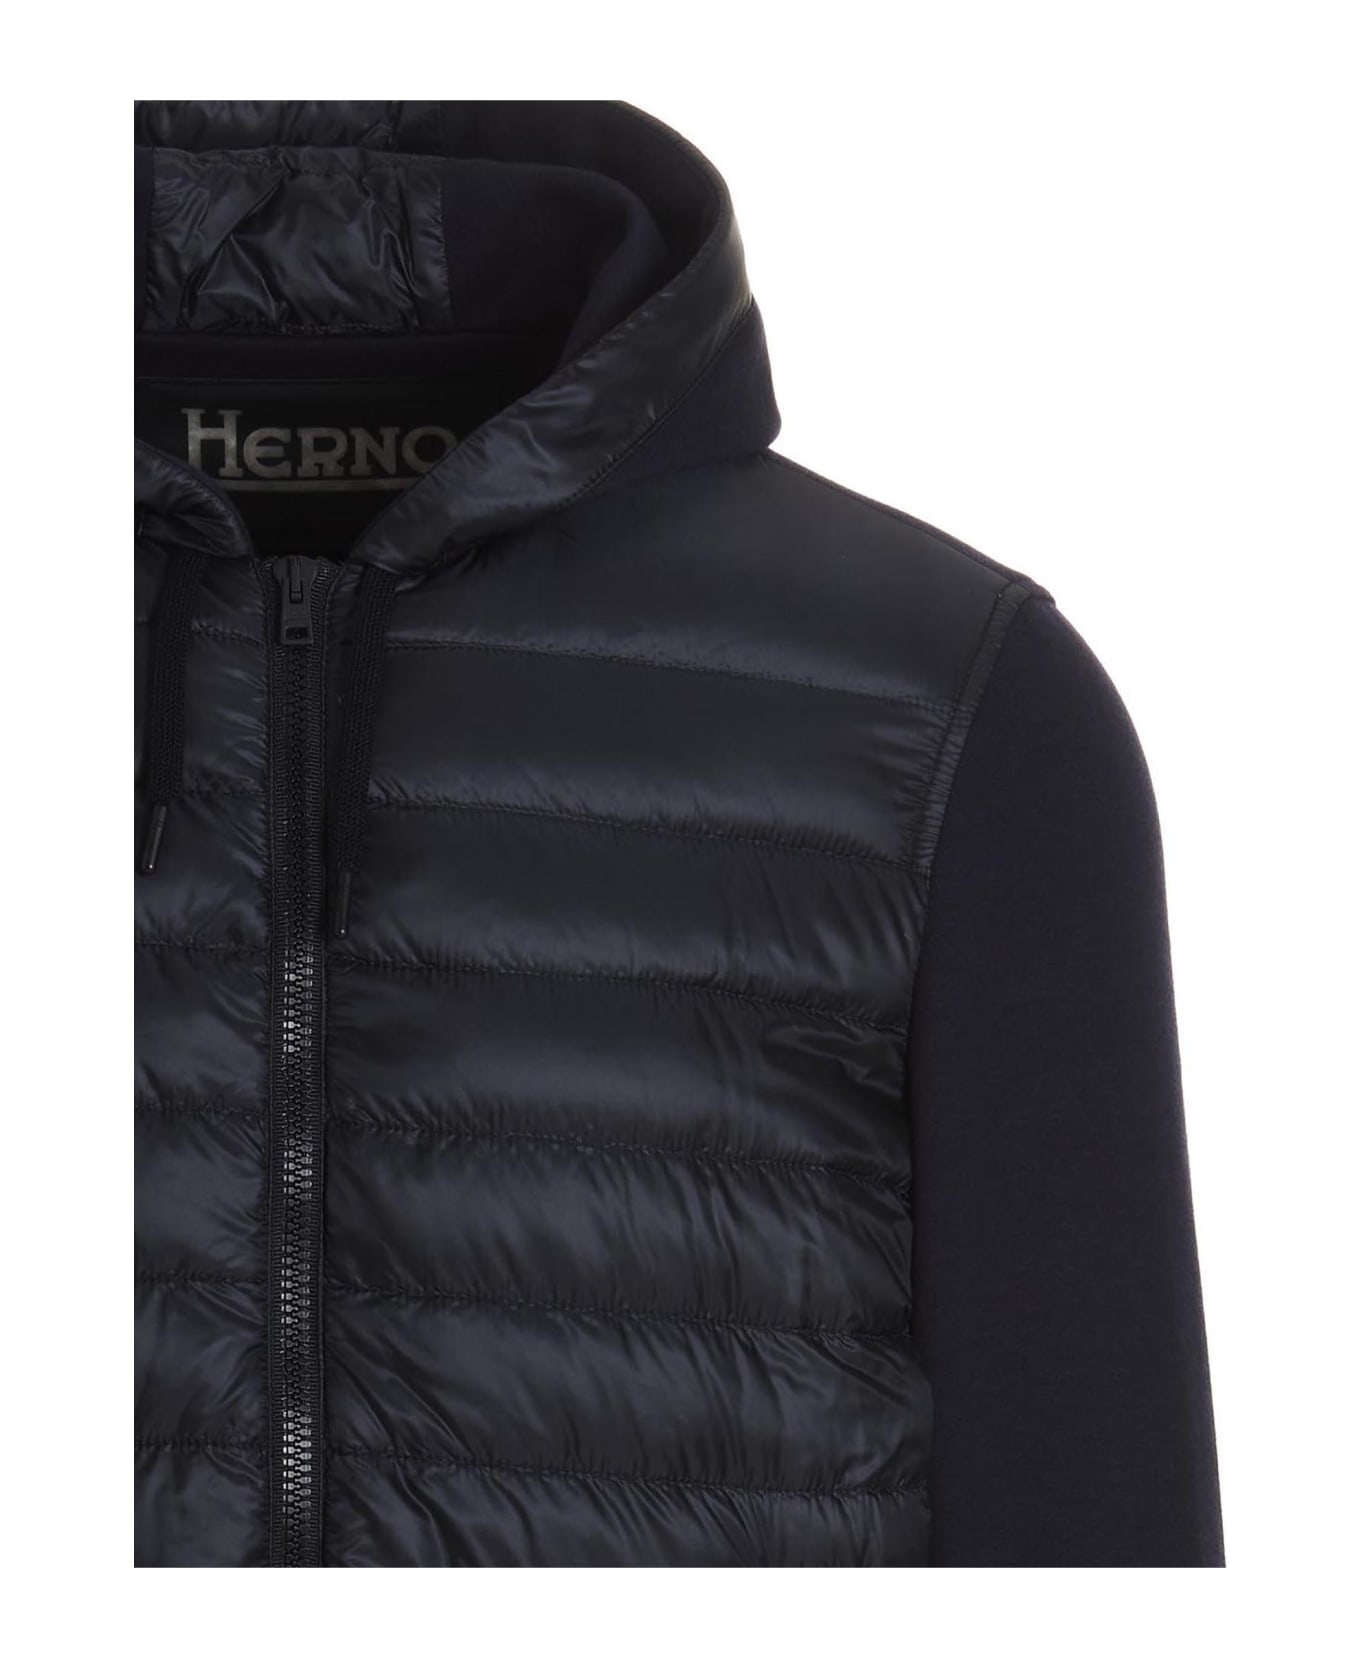 Herno Multi Material Hooded Jacket - BLUE